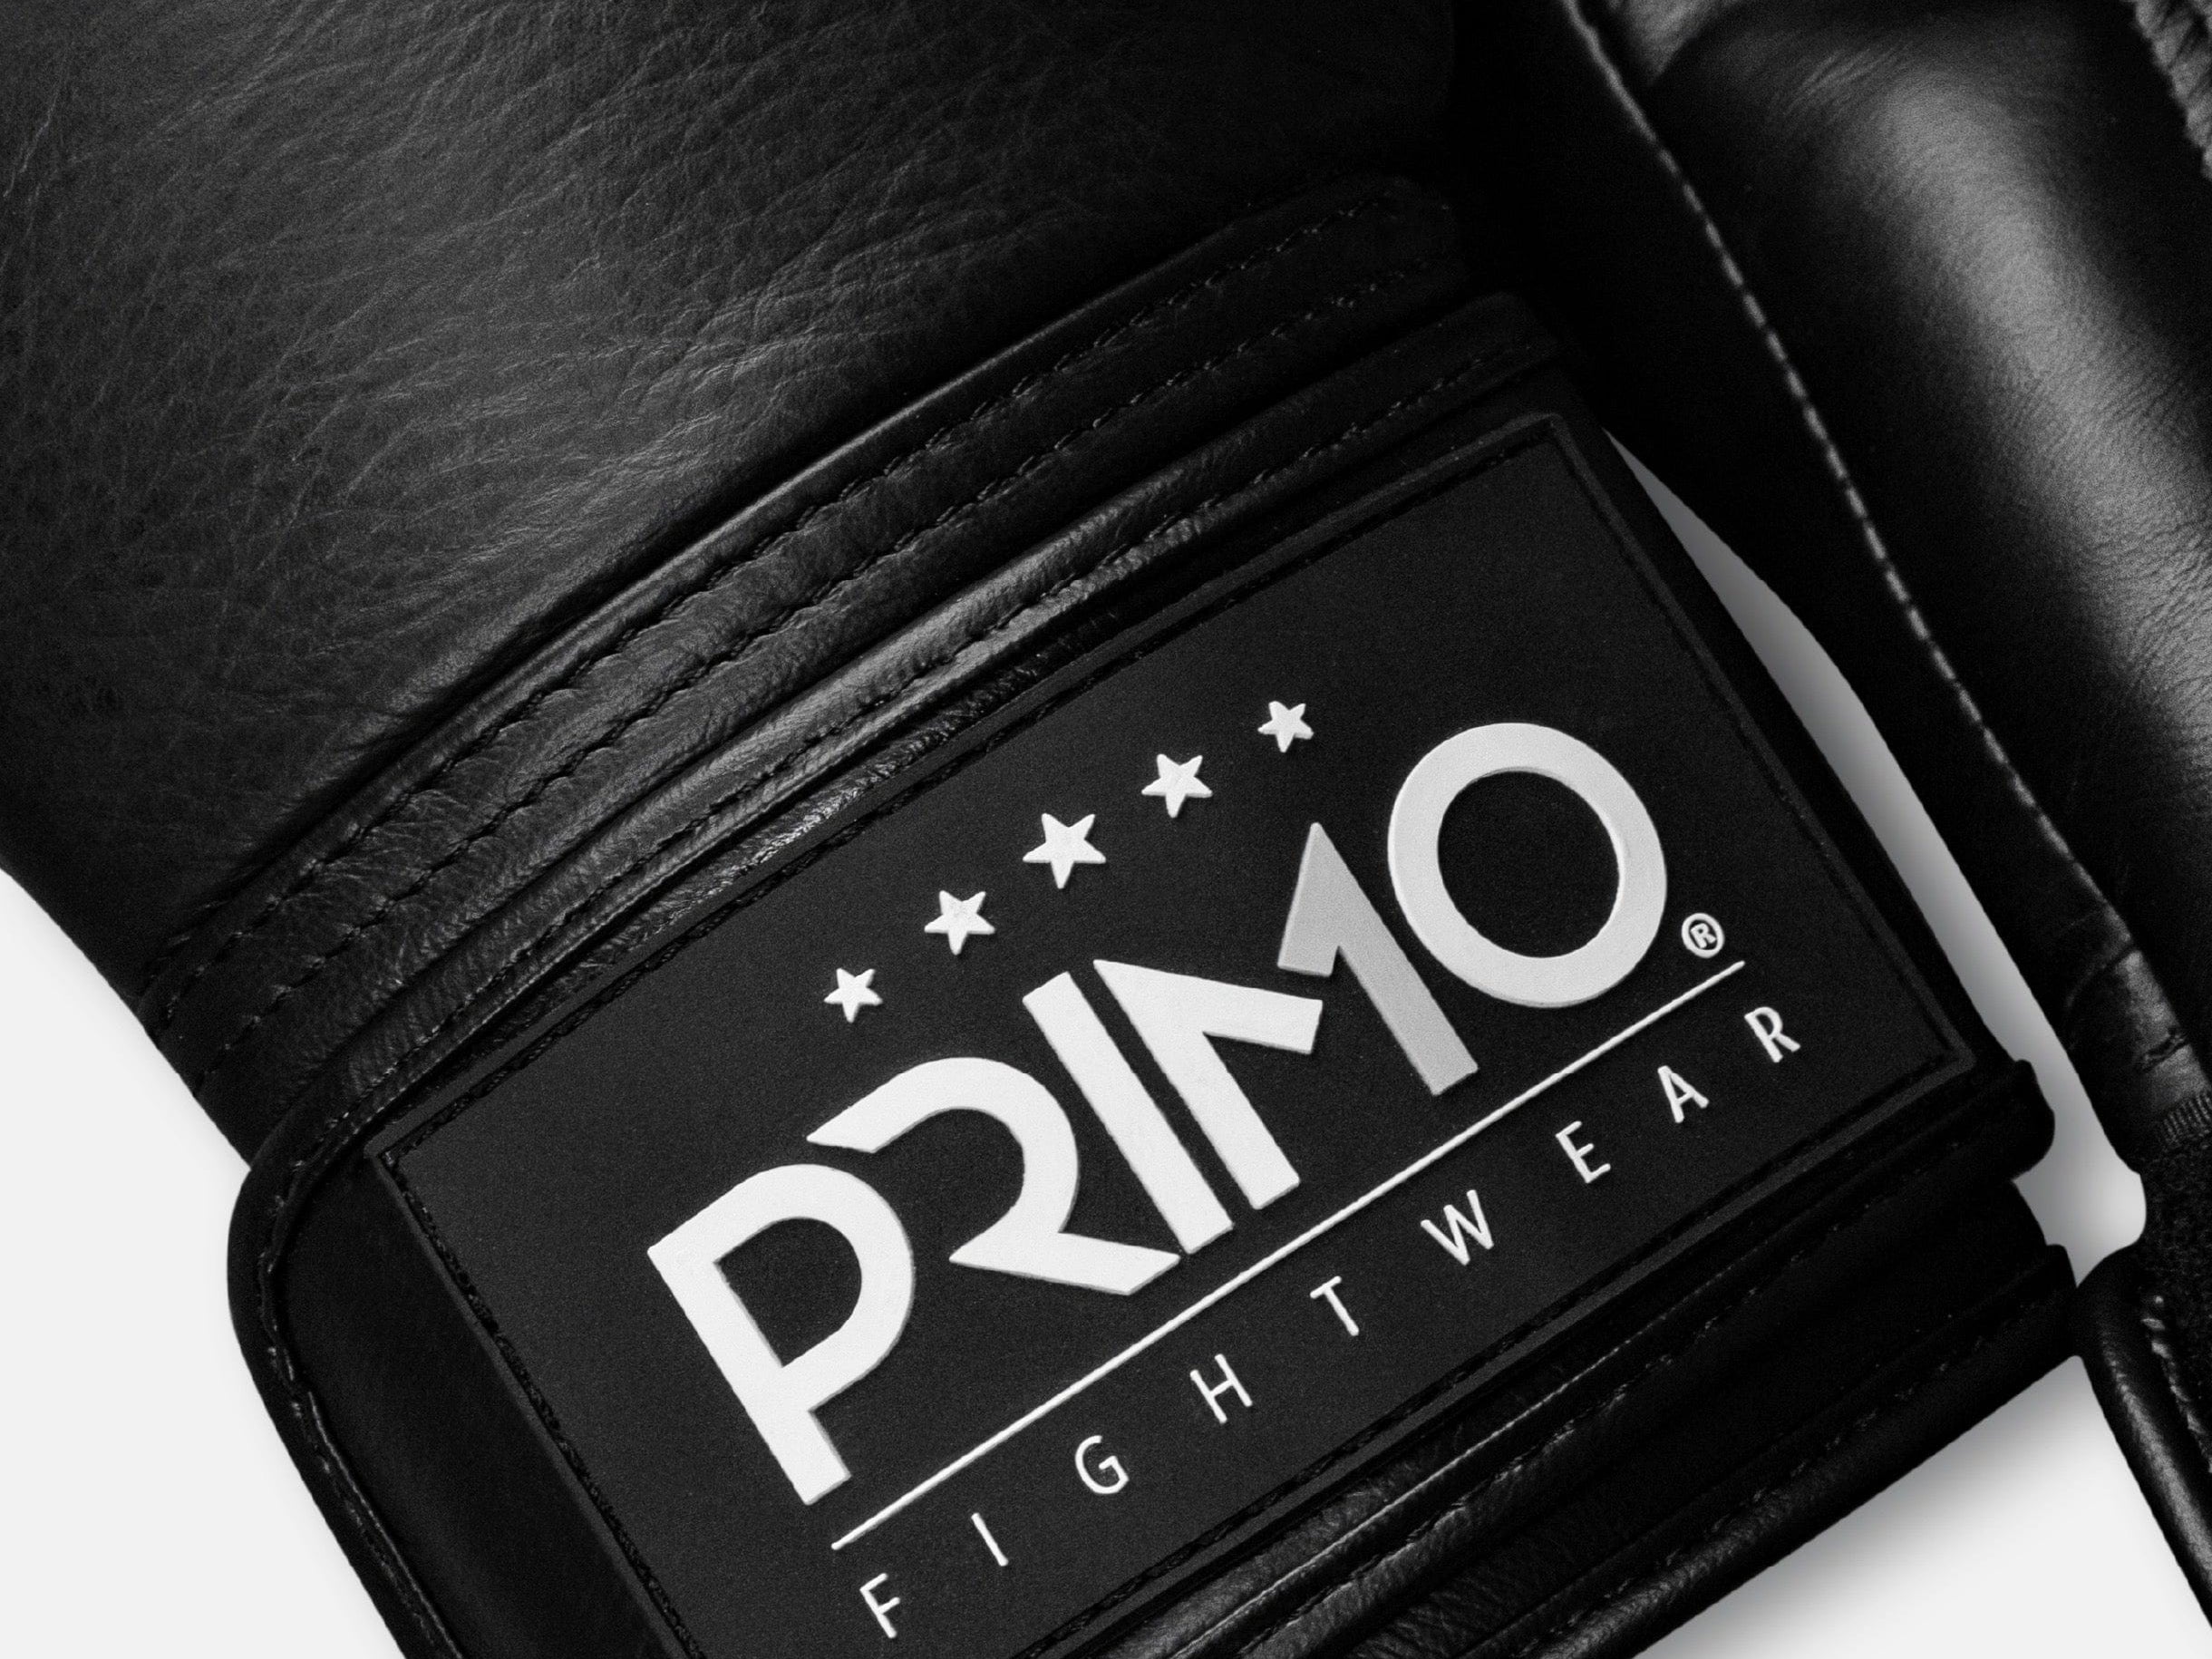 Primo Fight Wear Official Emblem 2.0 Boxing Gloves - Onyx Black